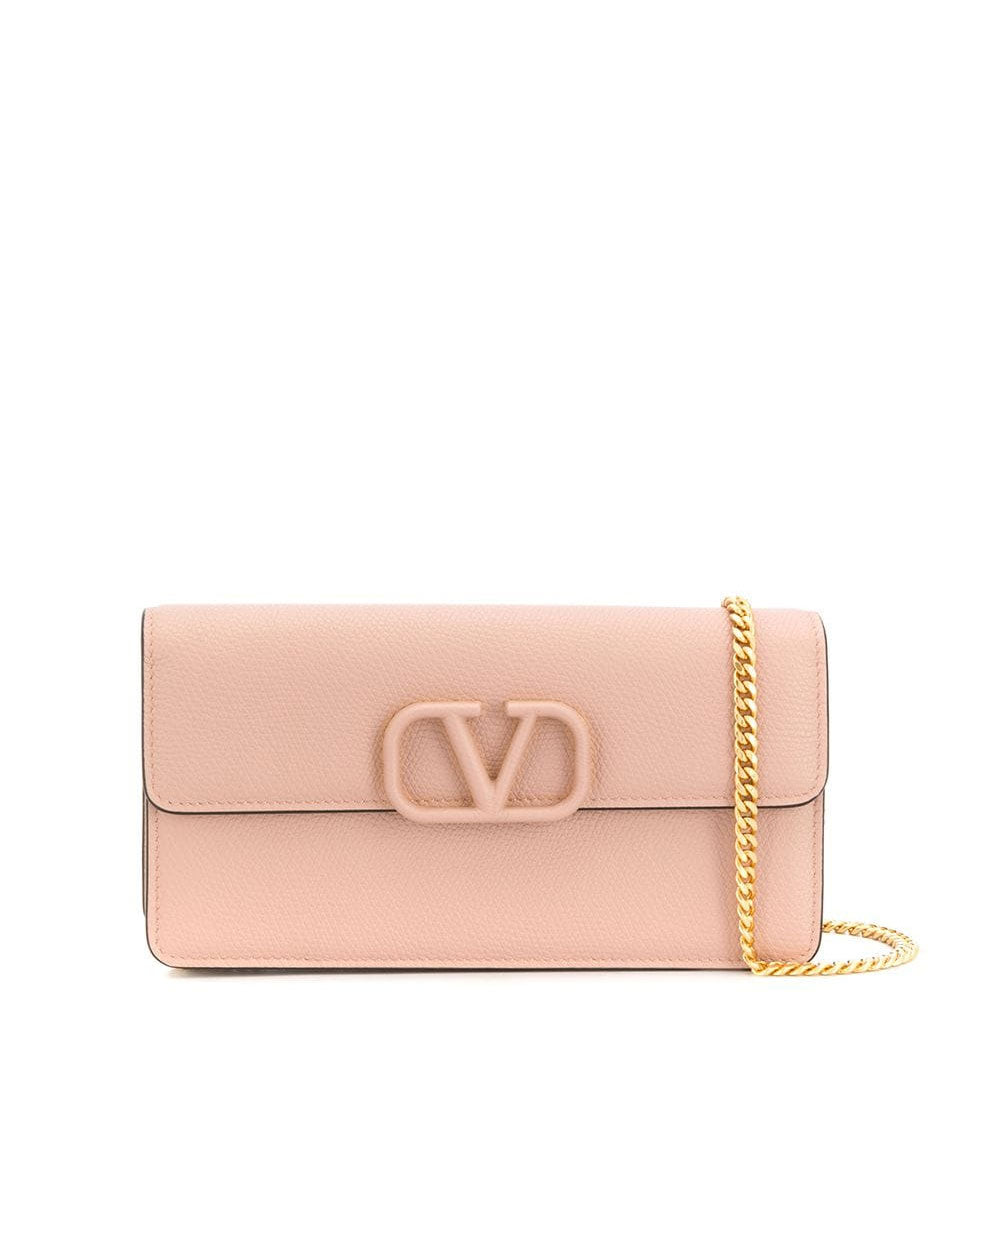 Vlogo Wallet on Chain in Rose